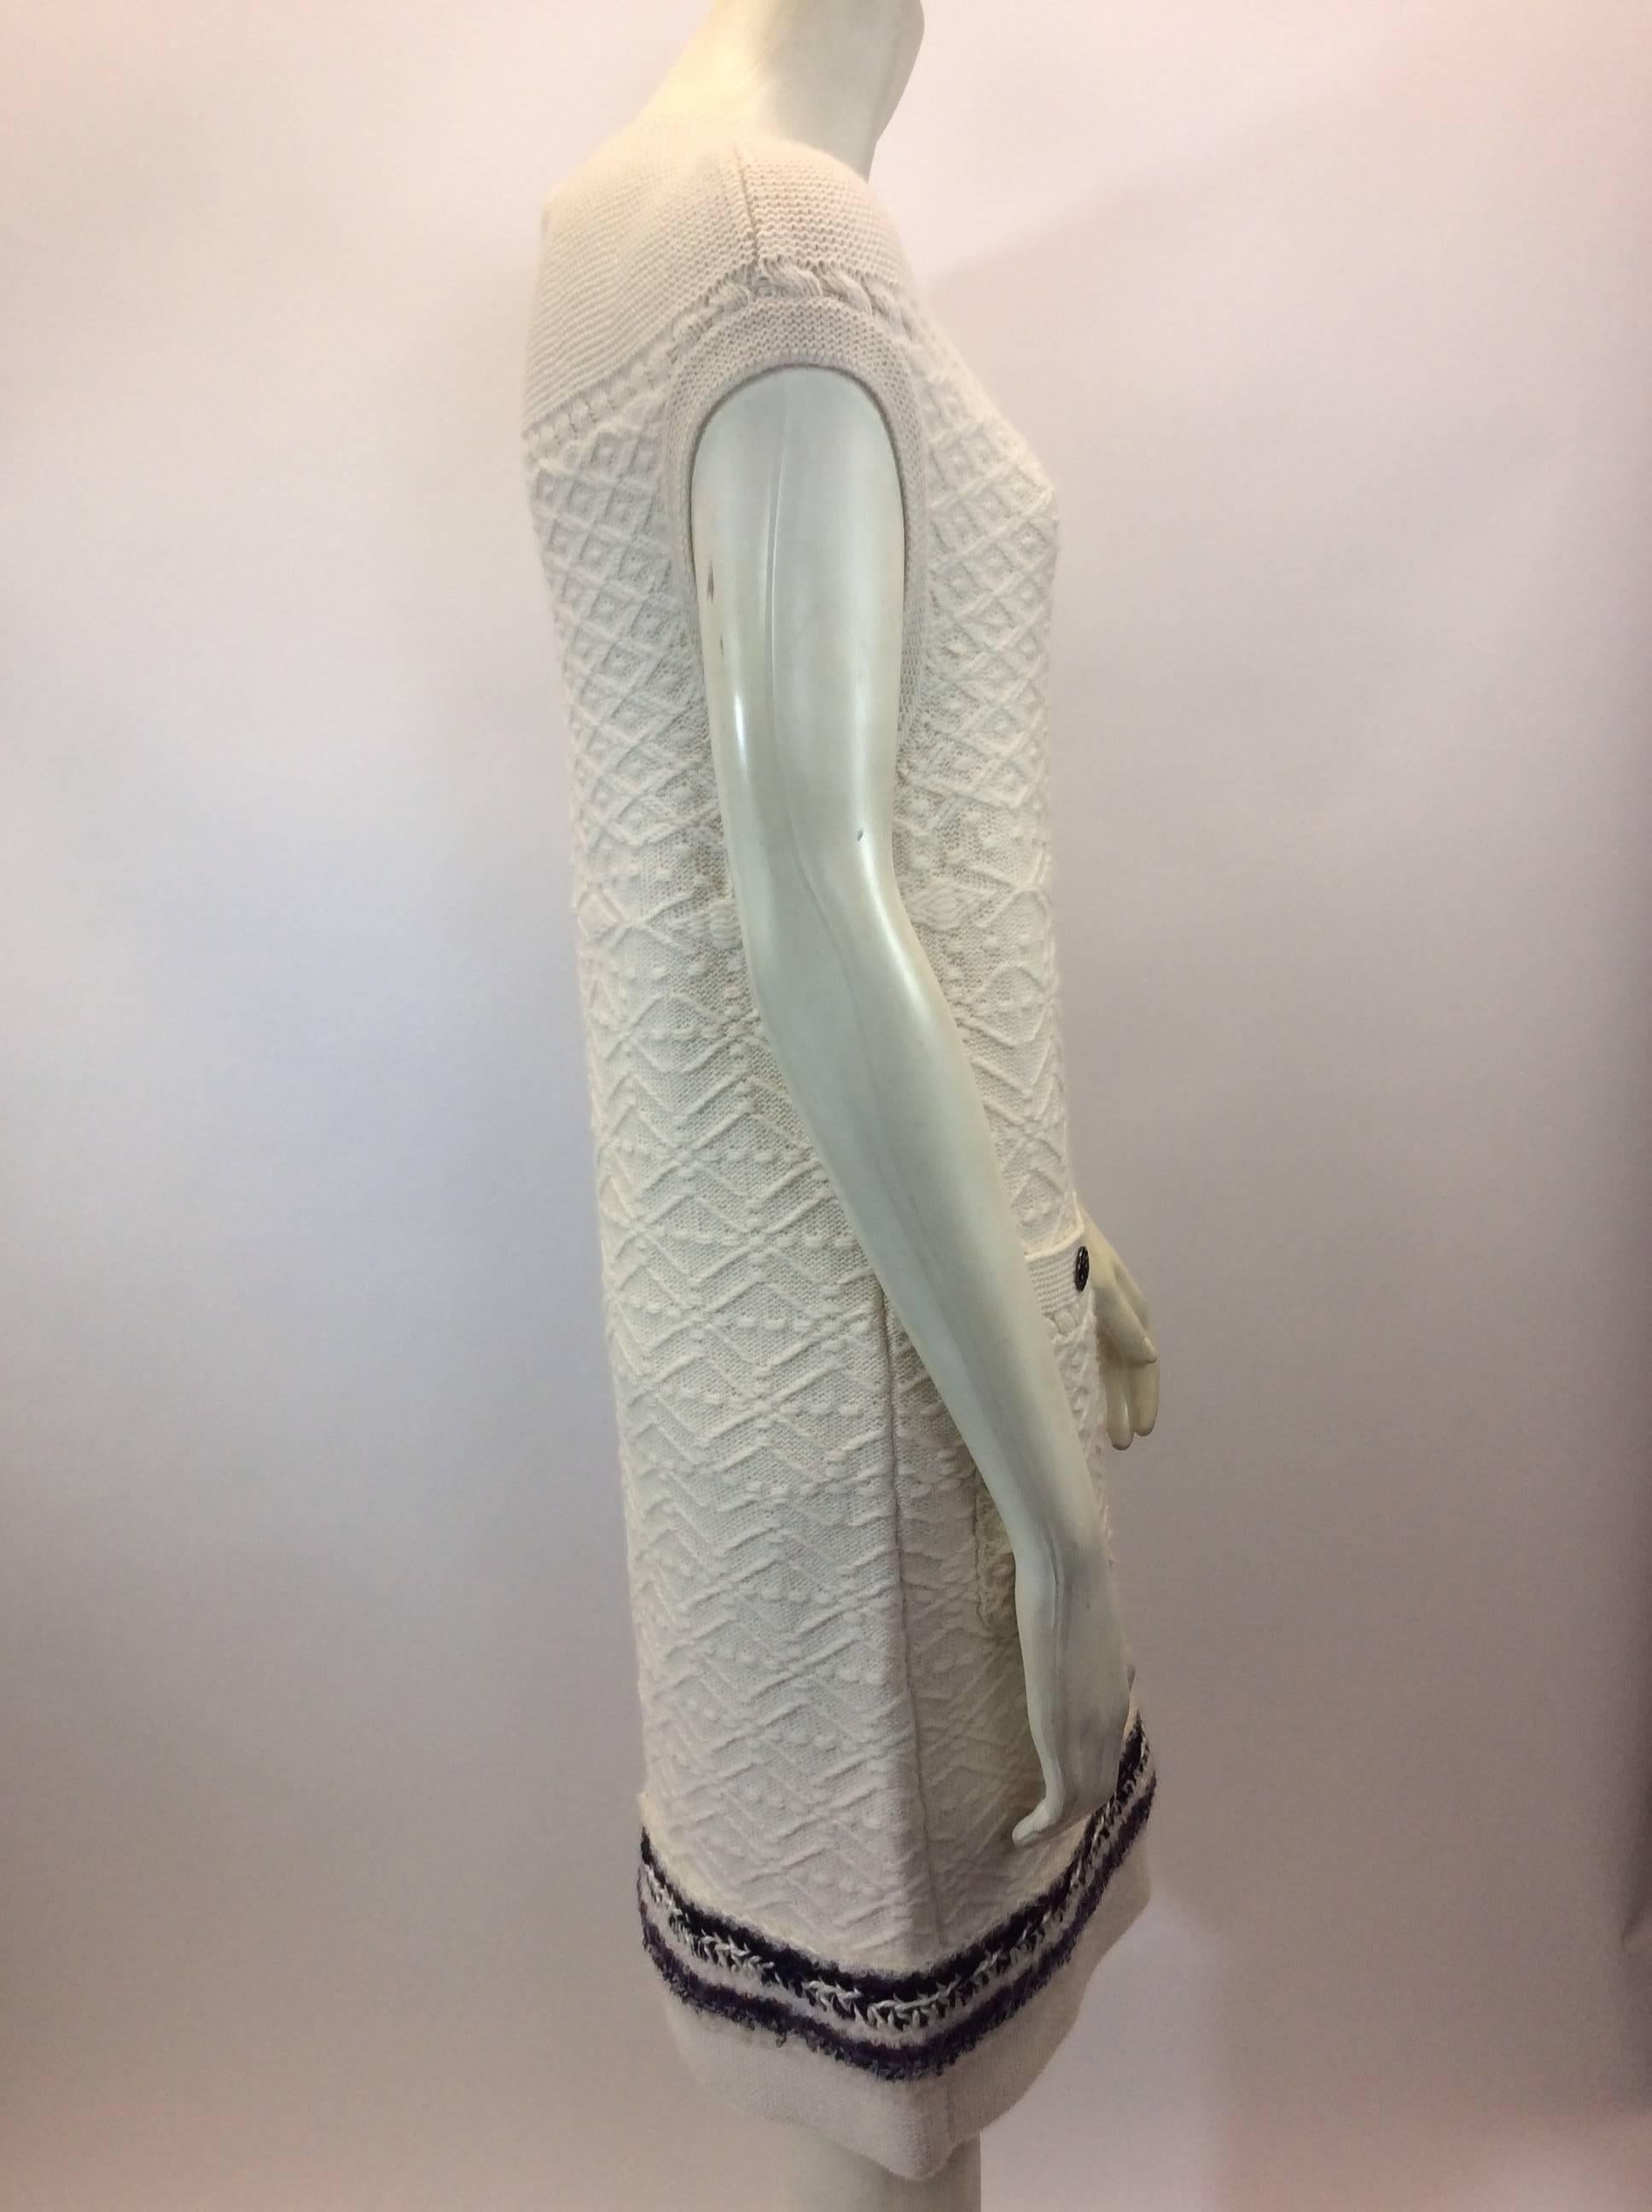 Chanel White Cashmere Knit Dress In Excellent Condition For Sale In Narberth, PA